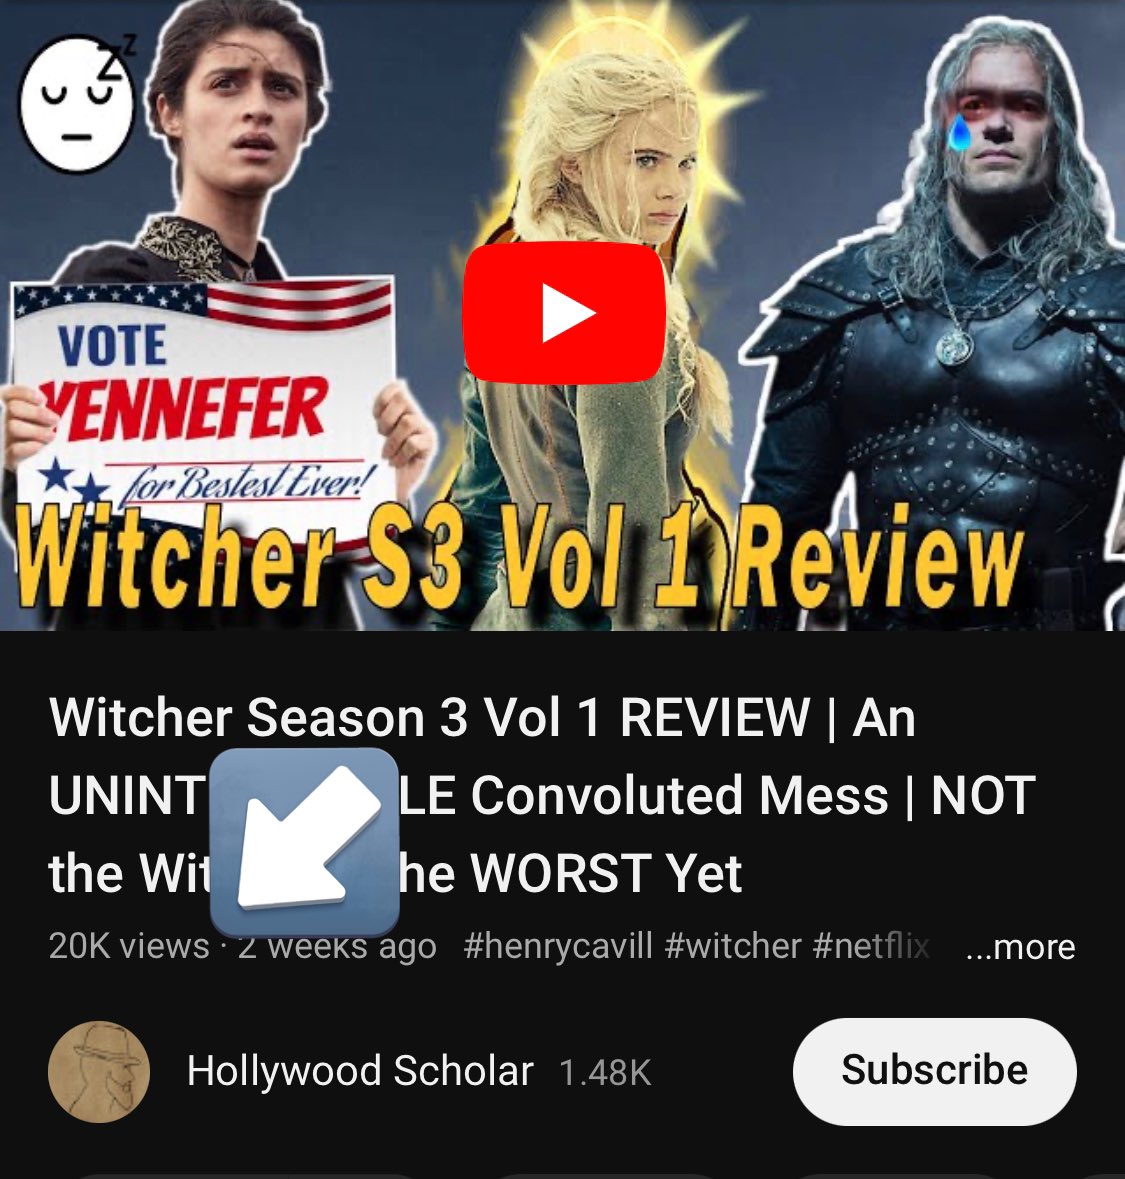 The Witcher Season 3 Volume 1 Review